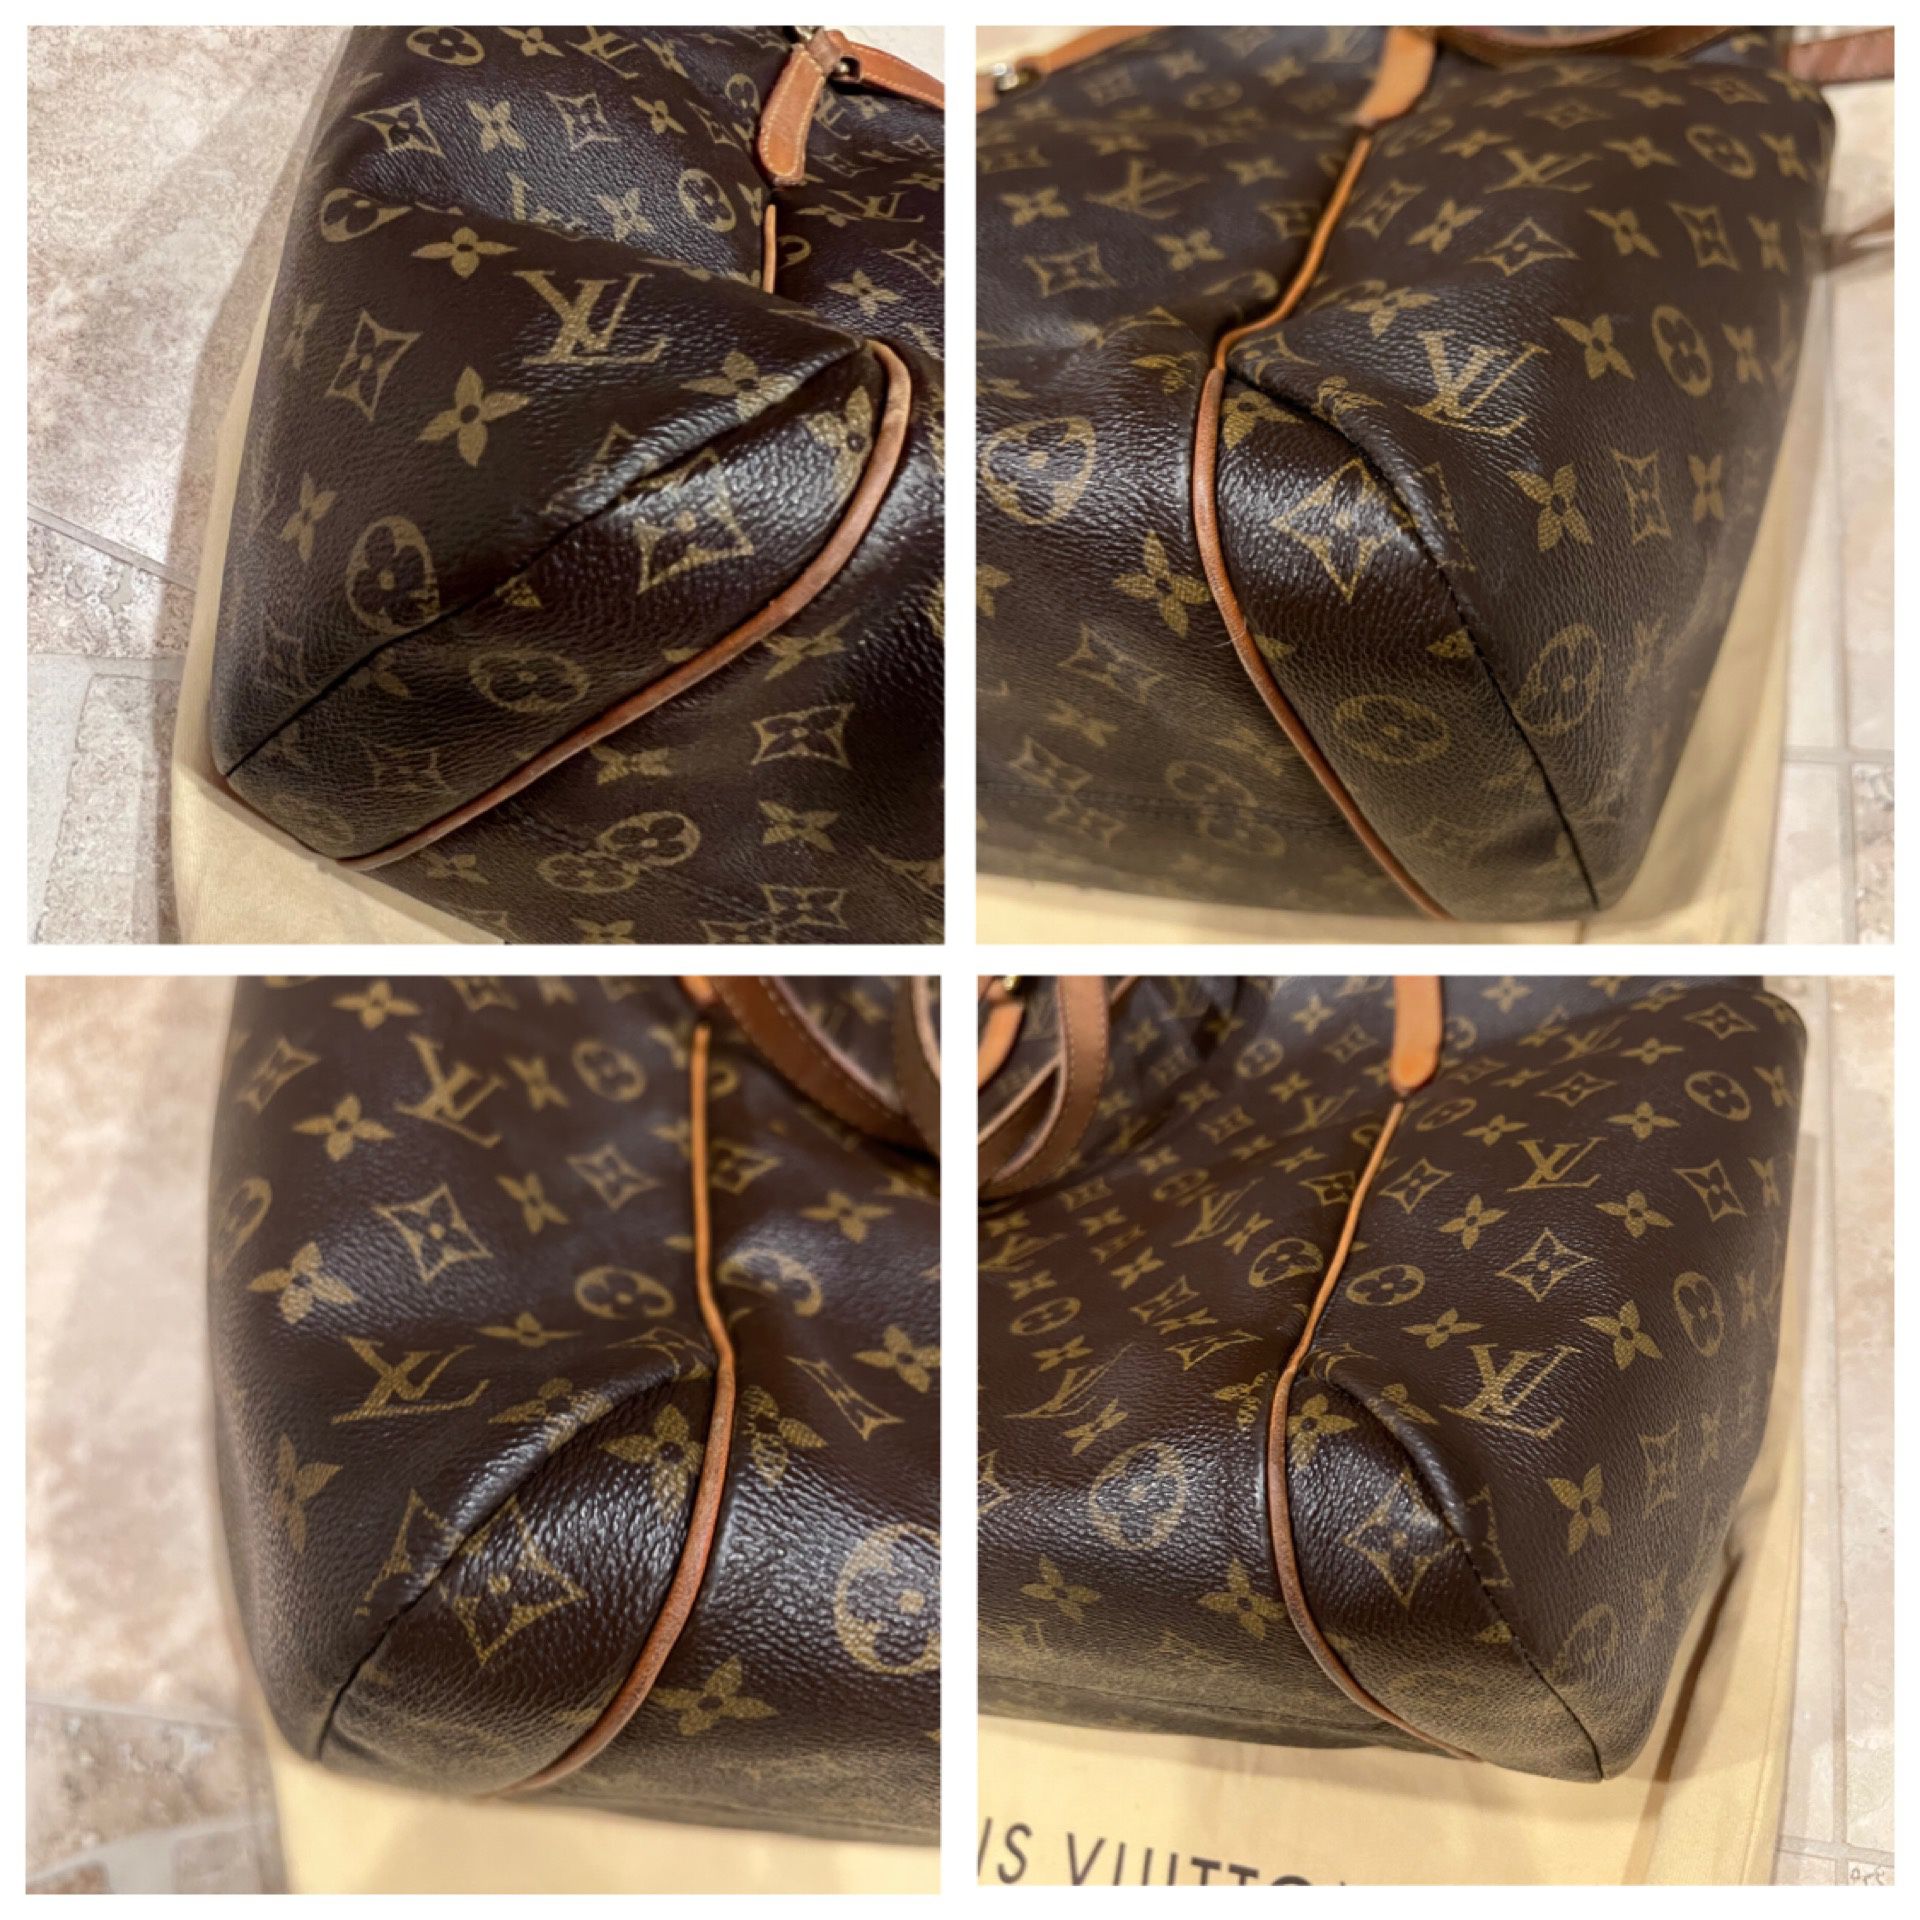 AUTHENTIC LV LOUIS VUITTON TOTALLY GM MONOGRAM BAG for Sale in Lake Villa,  IL - OfferUp